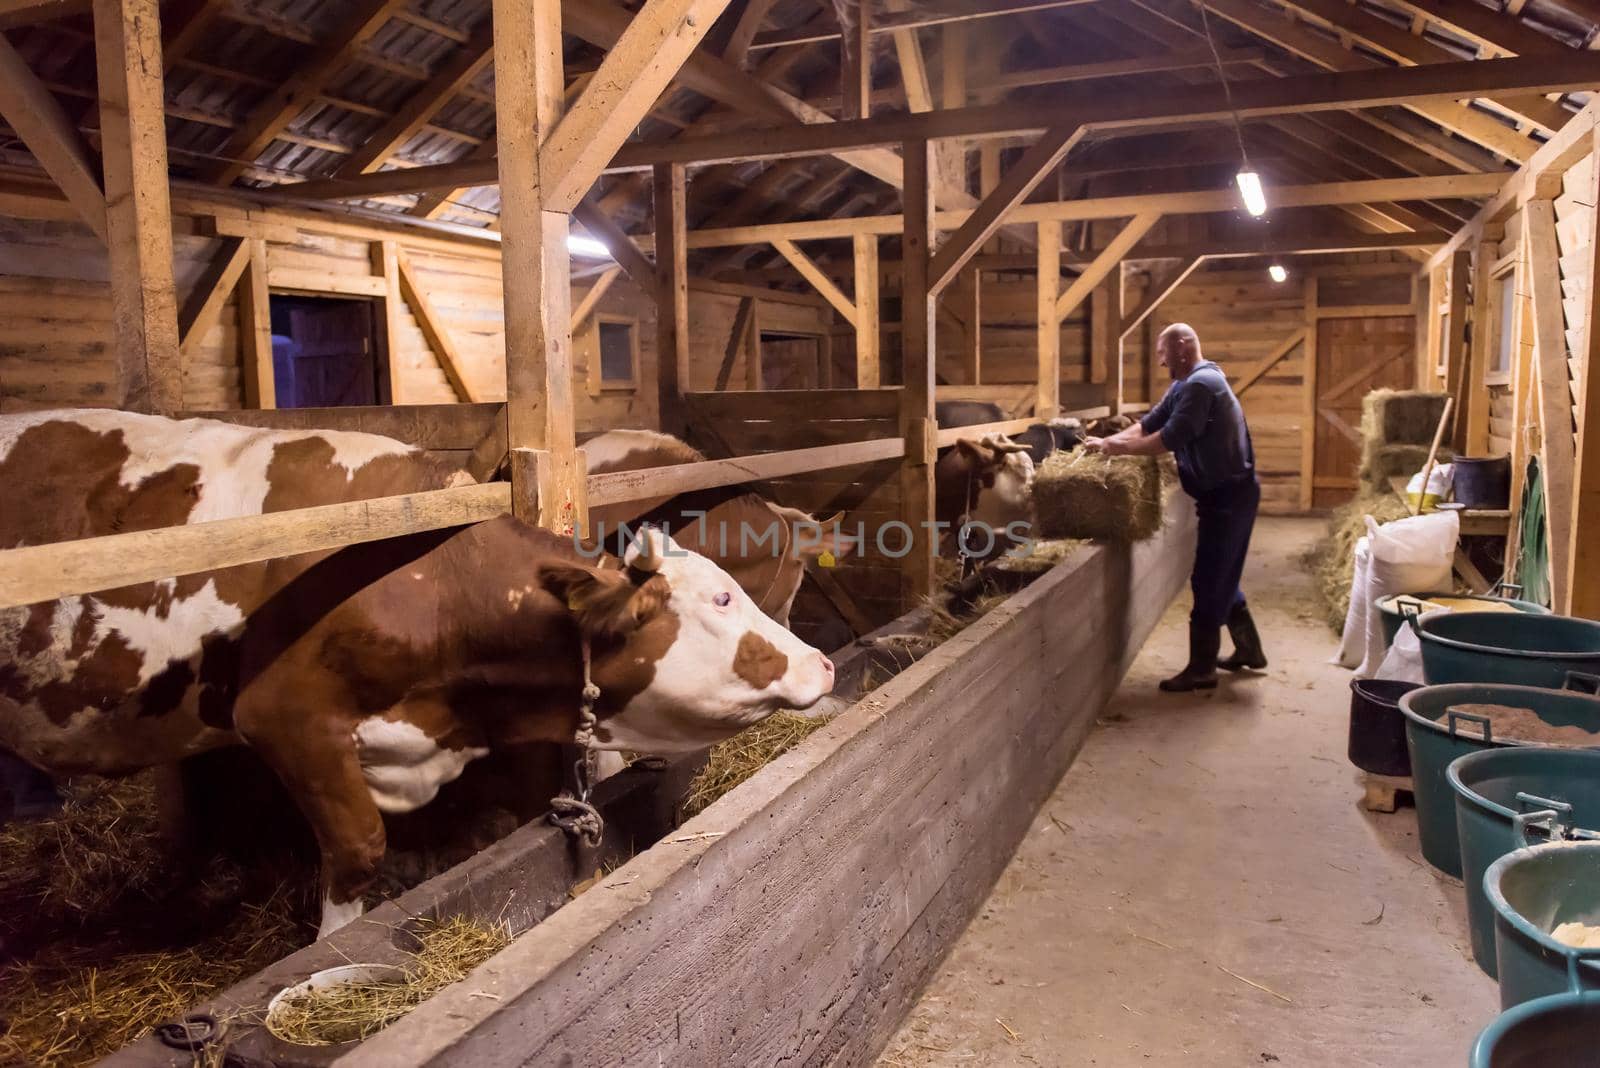 agriculture industry, farming and animal husbandry concept   herd of cows eating hay in cowshed on dairy farm